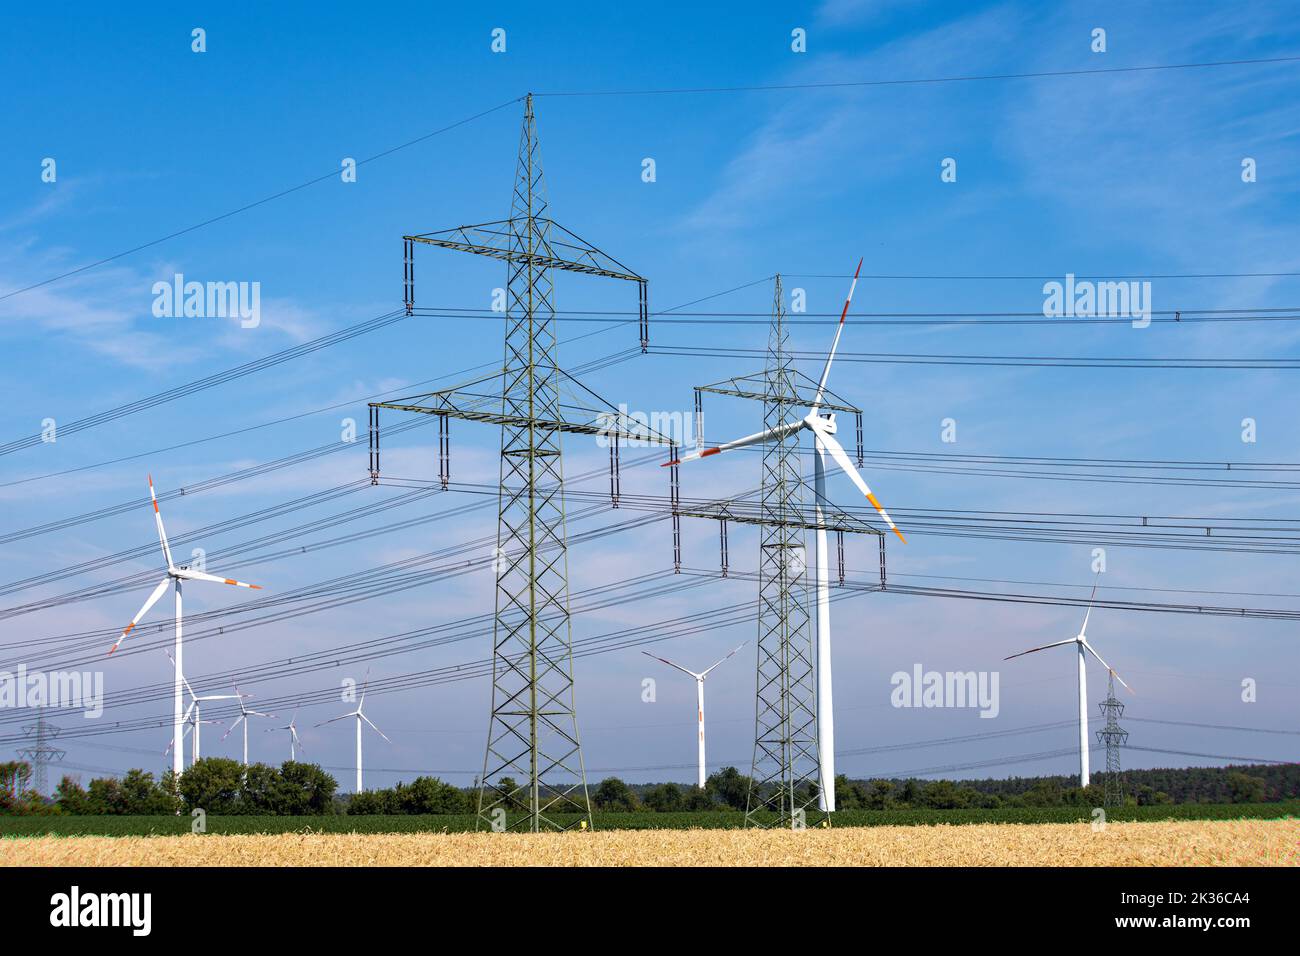 Power lines, pylons and wind turbines seen in Germany Stock Photo